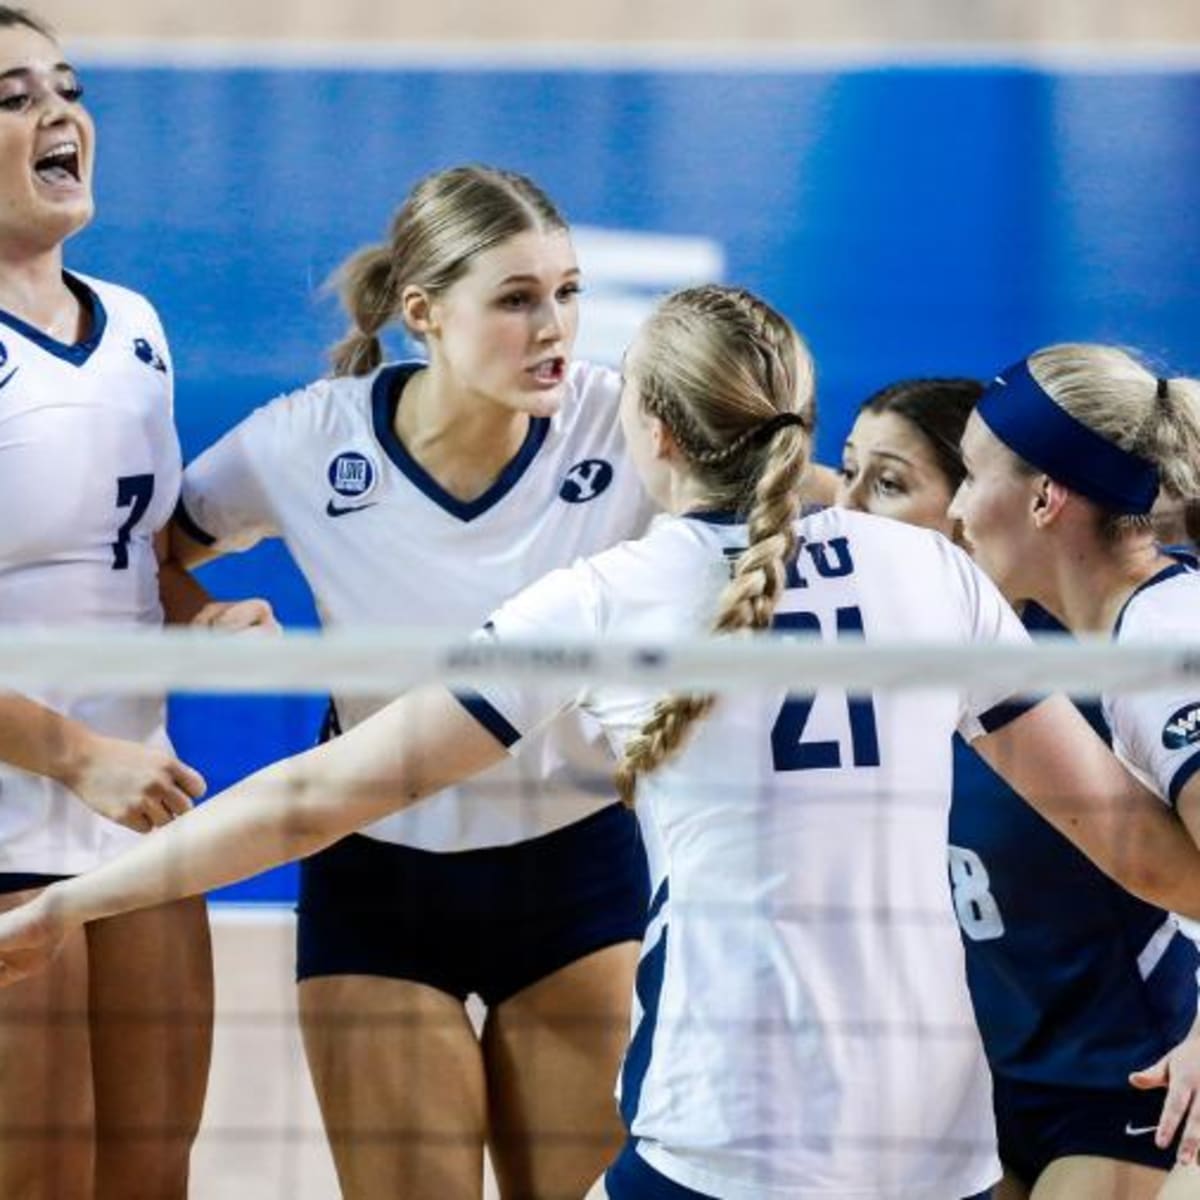 Washington at Oregon State Free Live Stream Volleyball Online - How to Watch and Stream Major League and College Sports